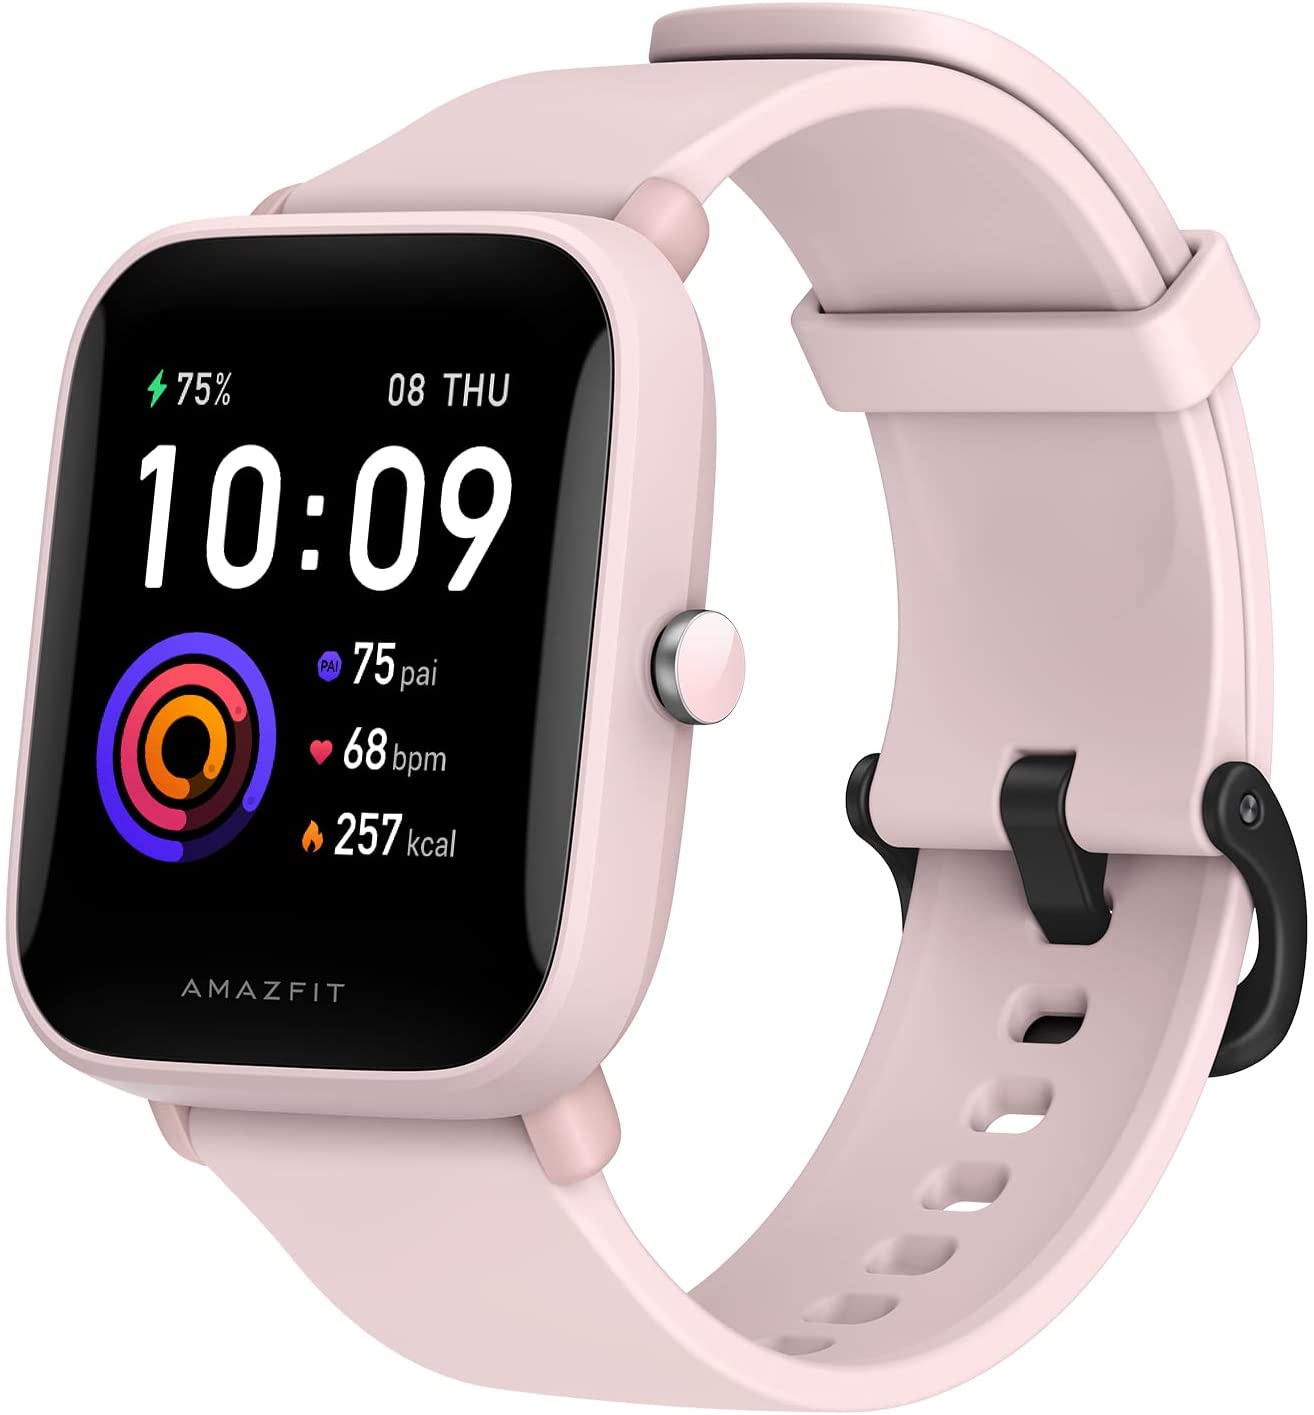 Amazfit Bip U Health Fitness Smartwatch with SpO2 Measurement, 9-Day Battery Life, Breathing, Heart Rate, Stress, Sleep Monitoring, Music Control, Water Resistant, 60 Sports Modes, HD Display, Pink